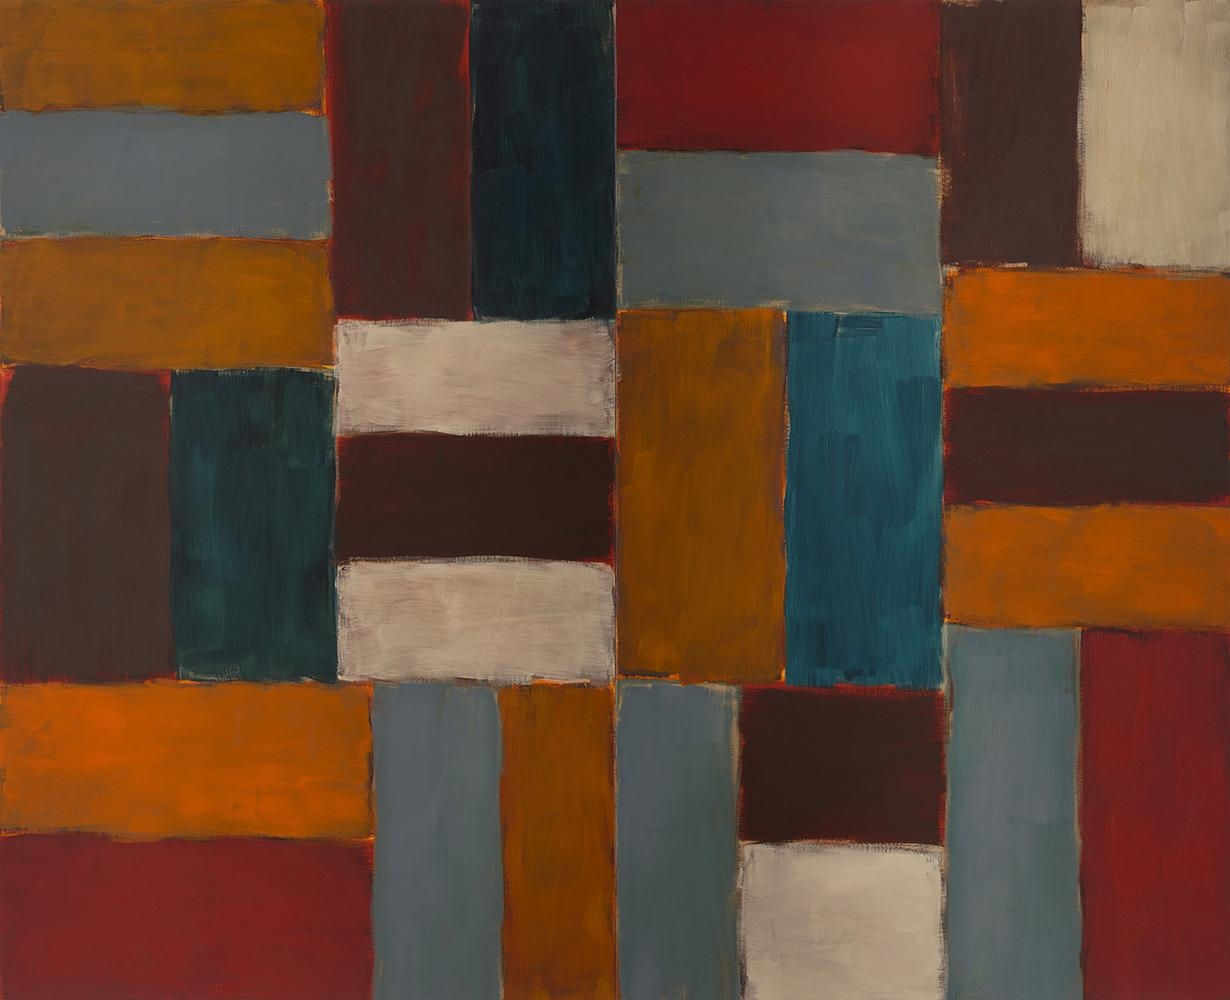 Sean Scully
Wall of Light Heat
2001
oil on linen
108 x 132 1/4 inches (274.3 x 335.9 cm)